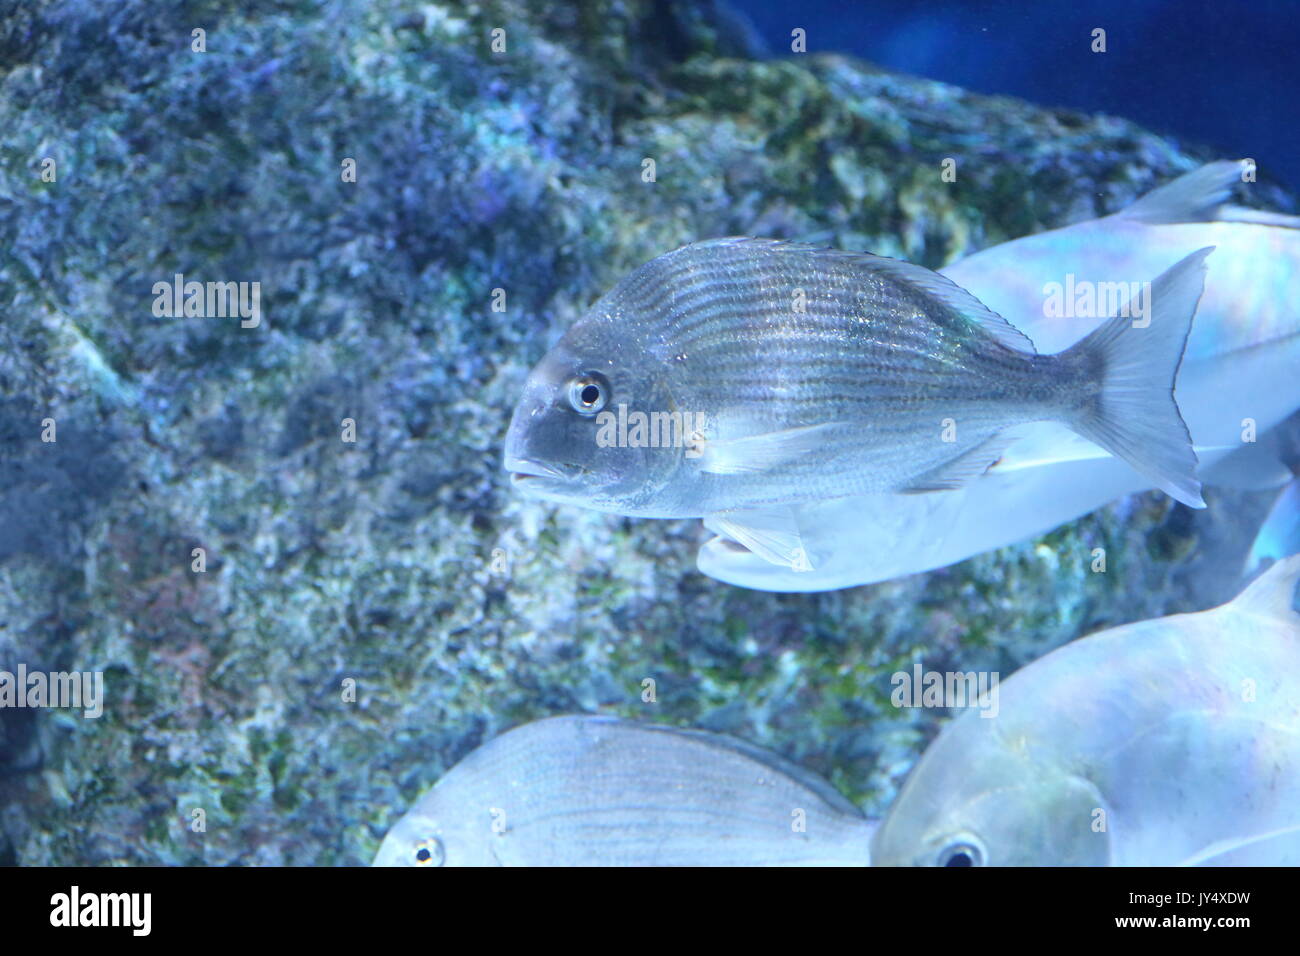 Red seabream (Pagrus major) in Japan Stock Photo